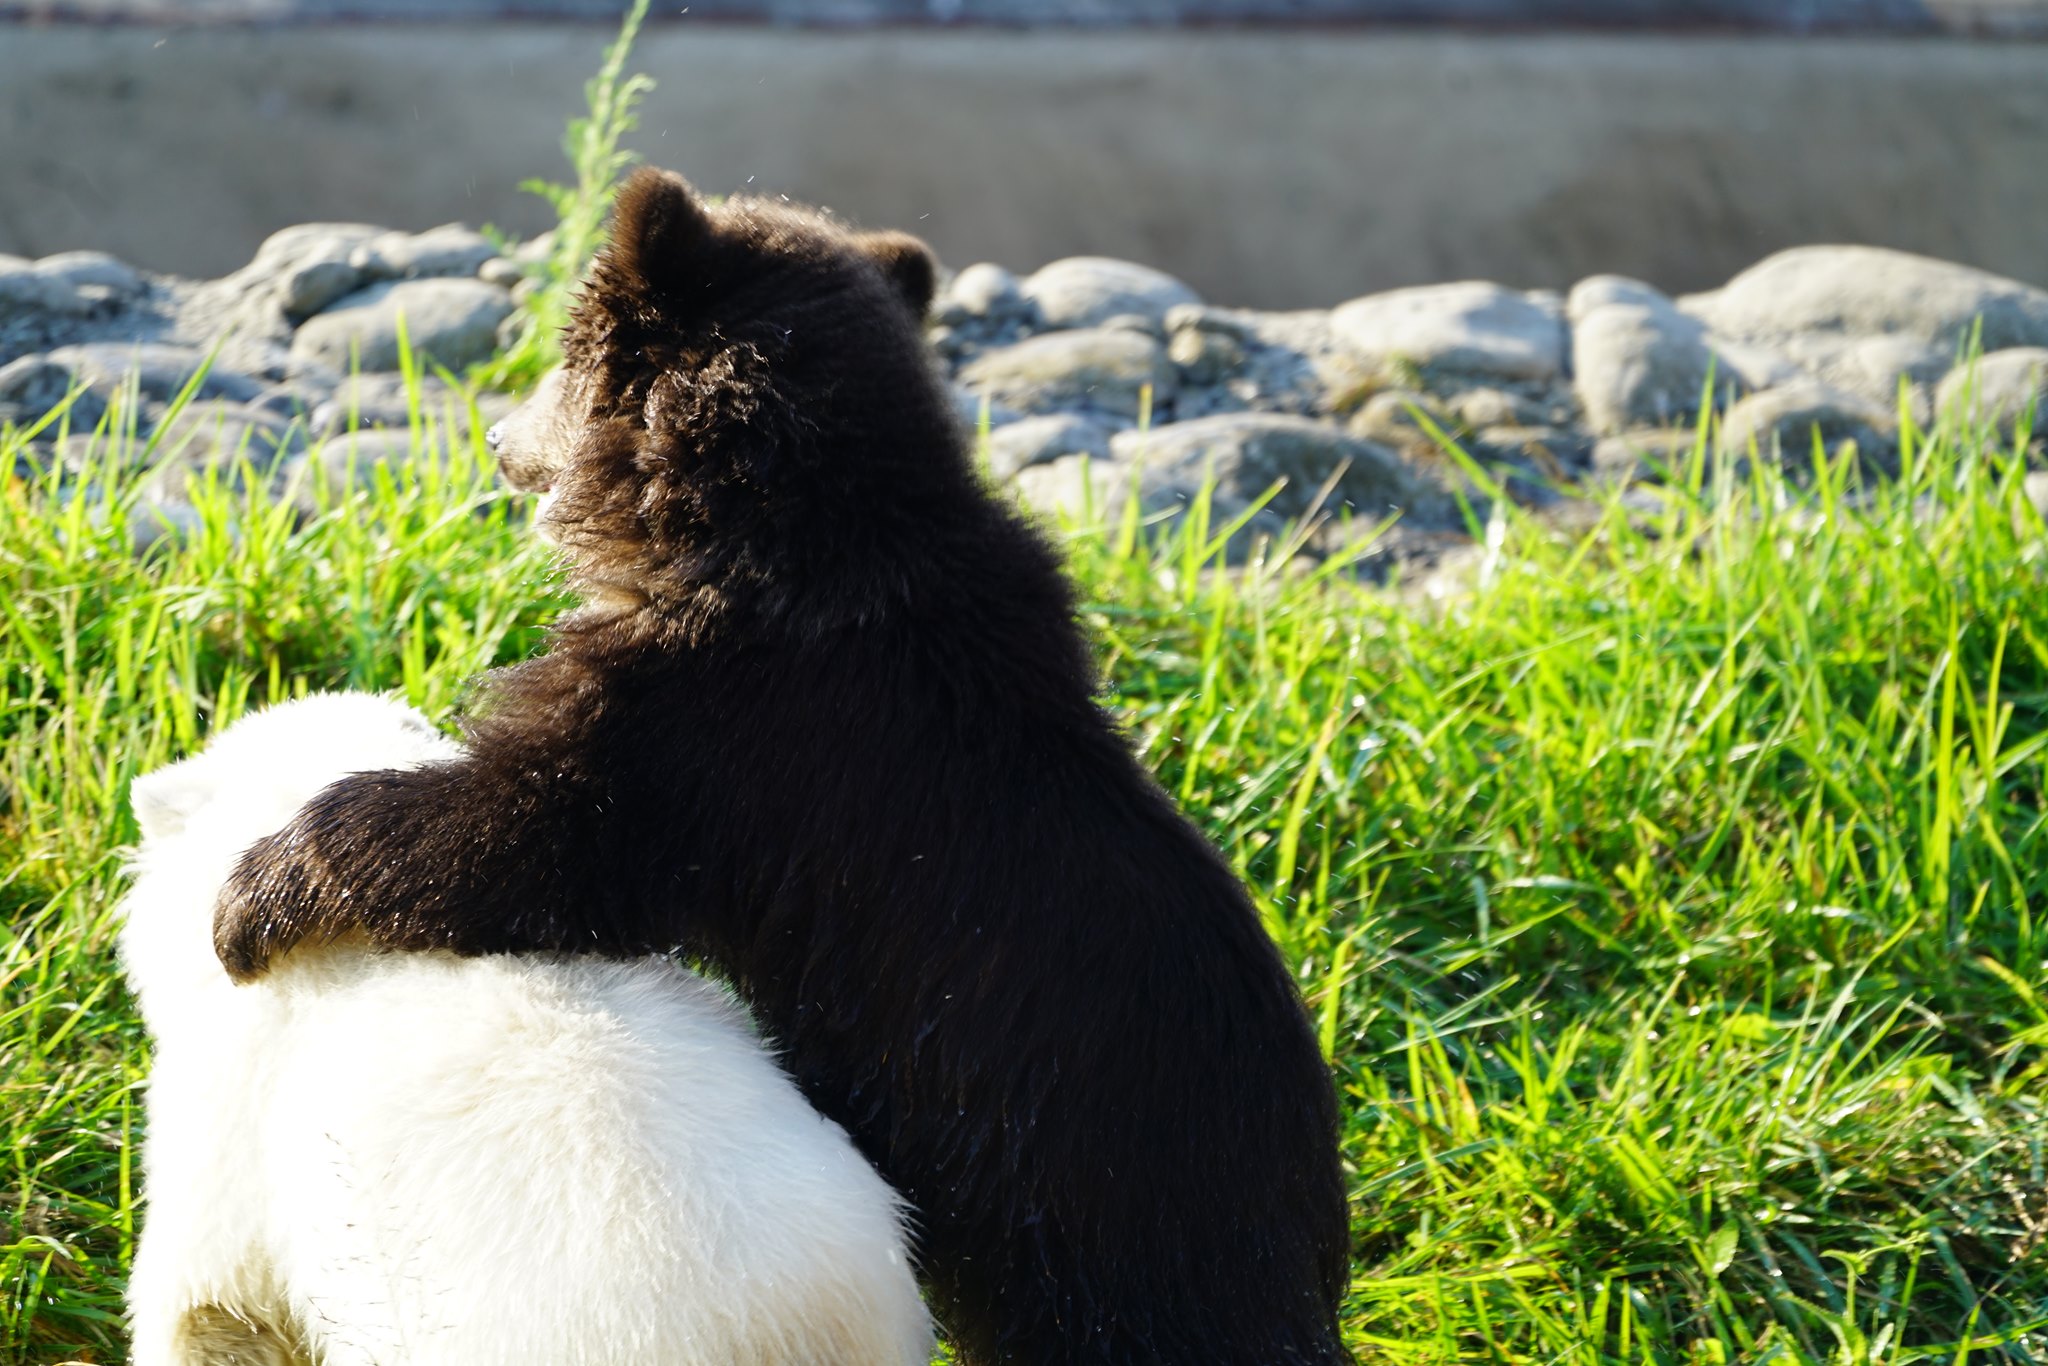 grizzly bear cub with his arm around a polar bear cub inside a grassy area with rocks in the distance